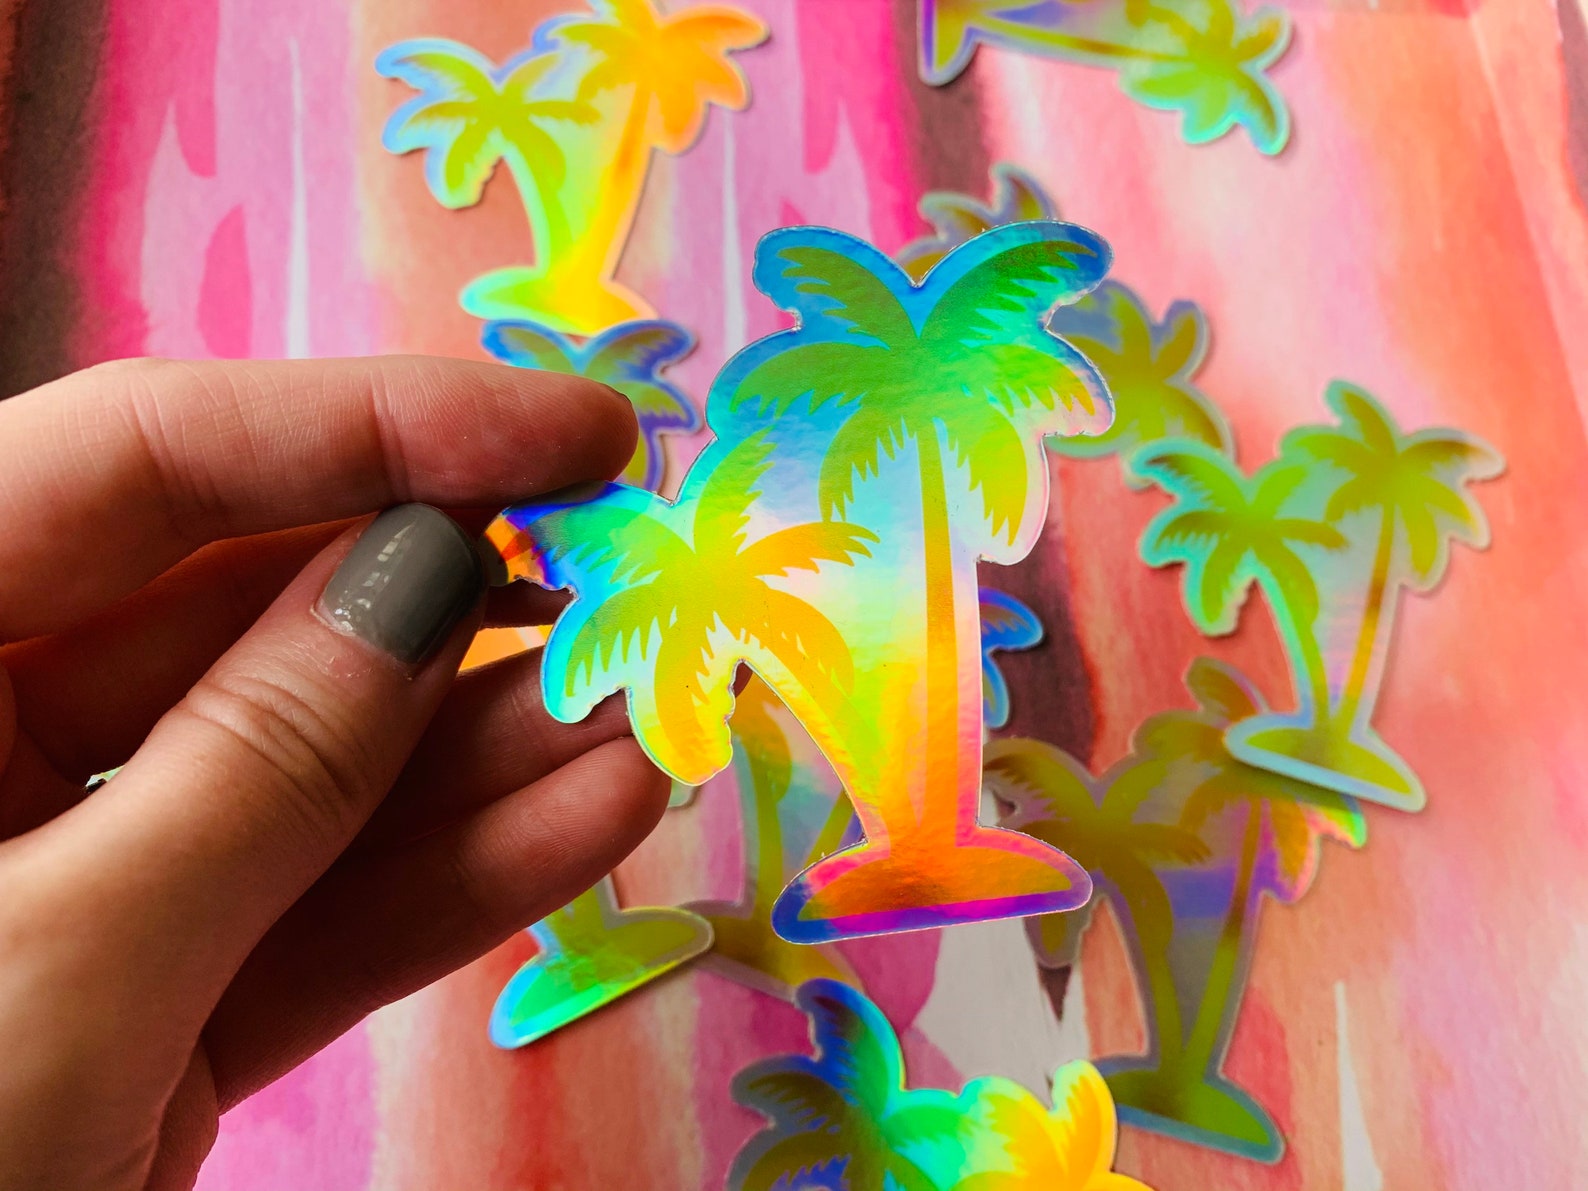 Holographic Palm Tree Sticker 3x3 inch Waterproof Laptop | Etsy